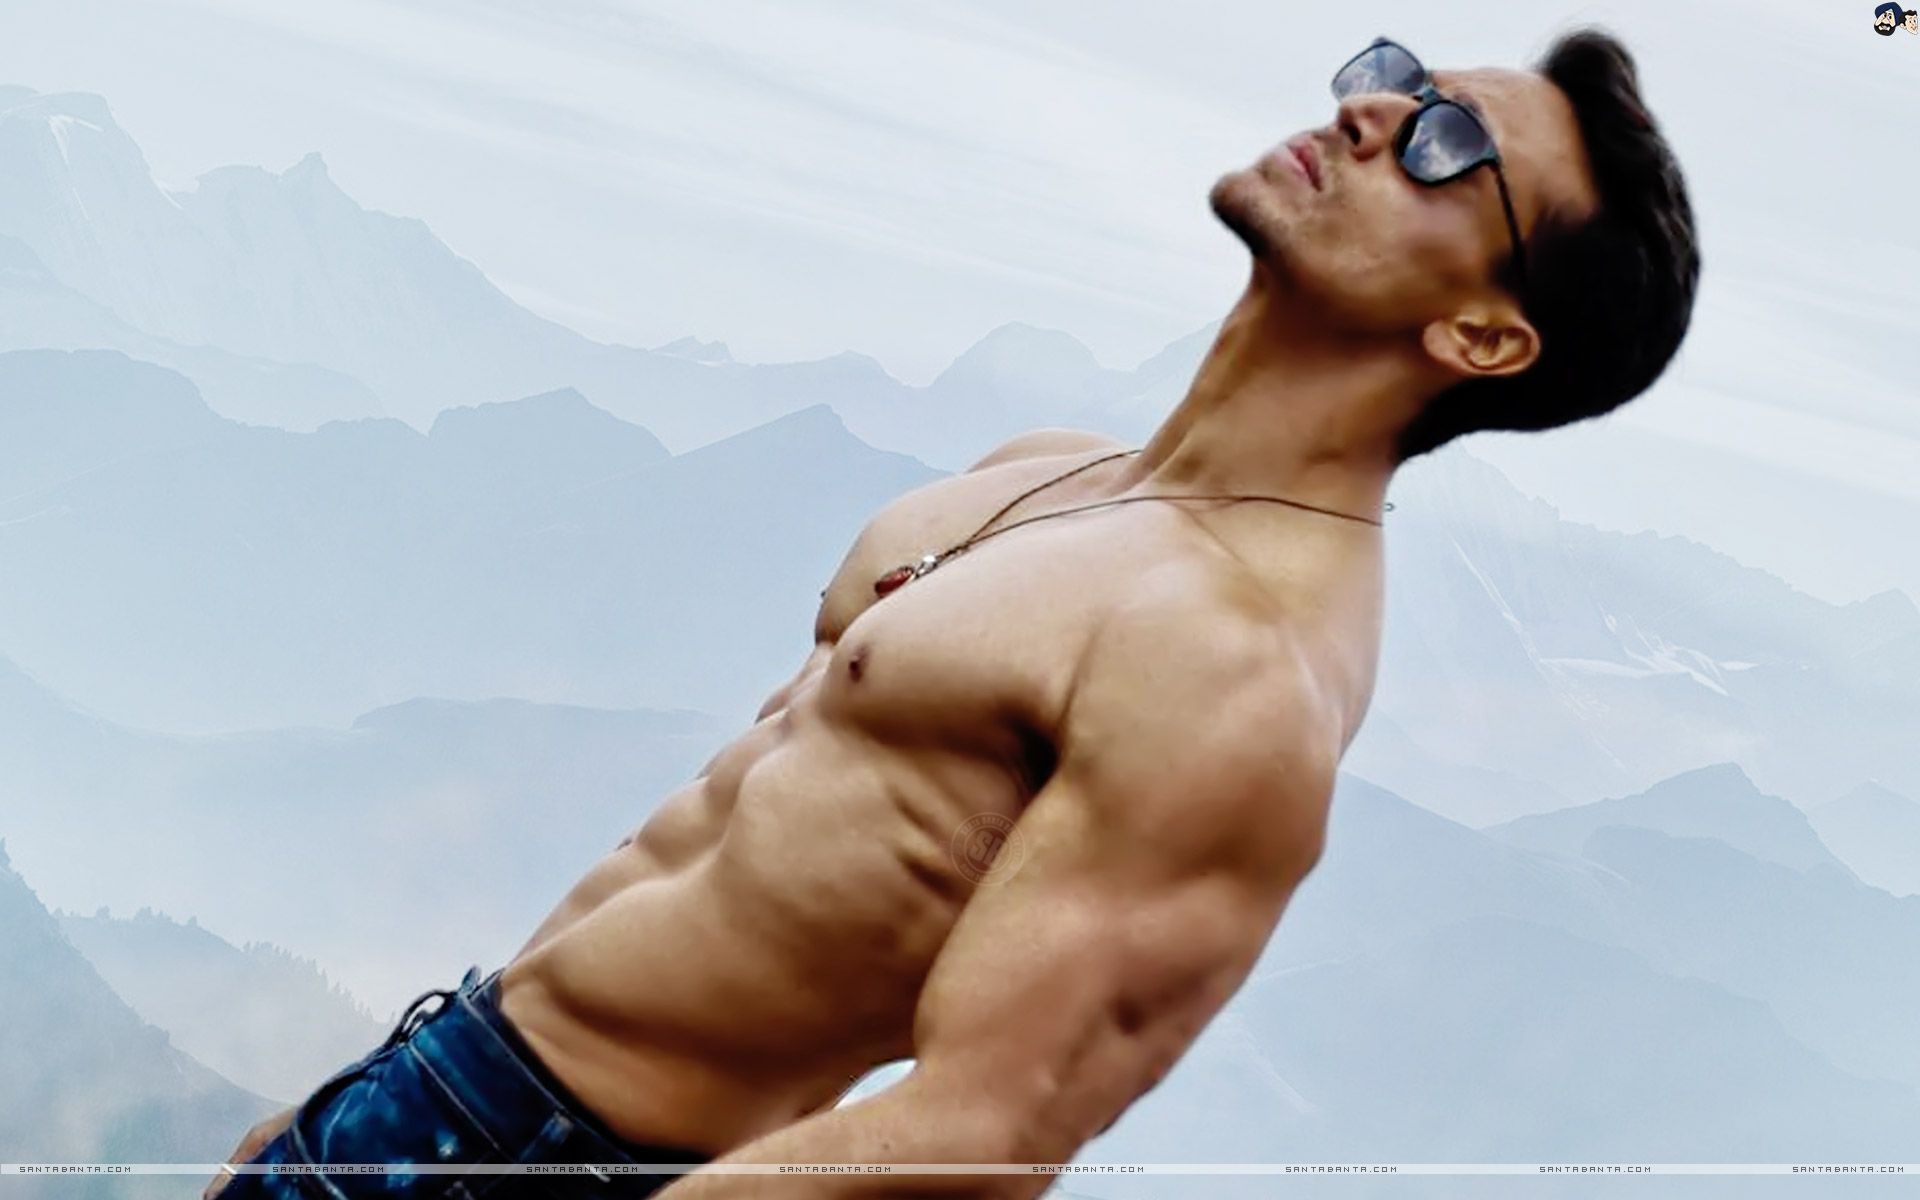 Tiger Shroff in 8 pack abs